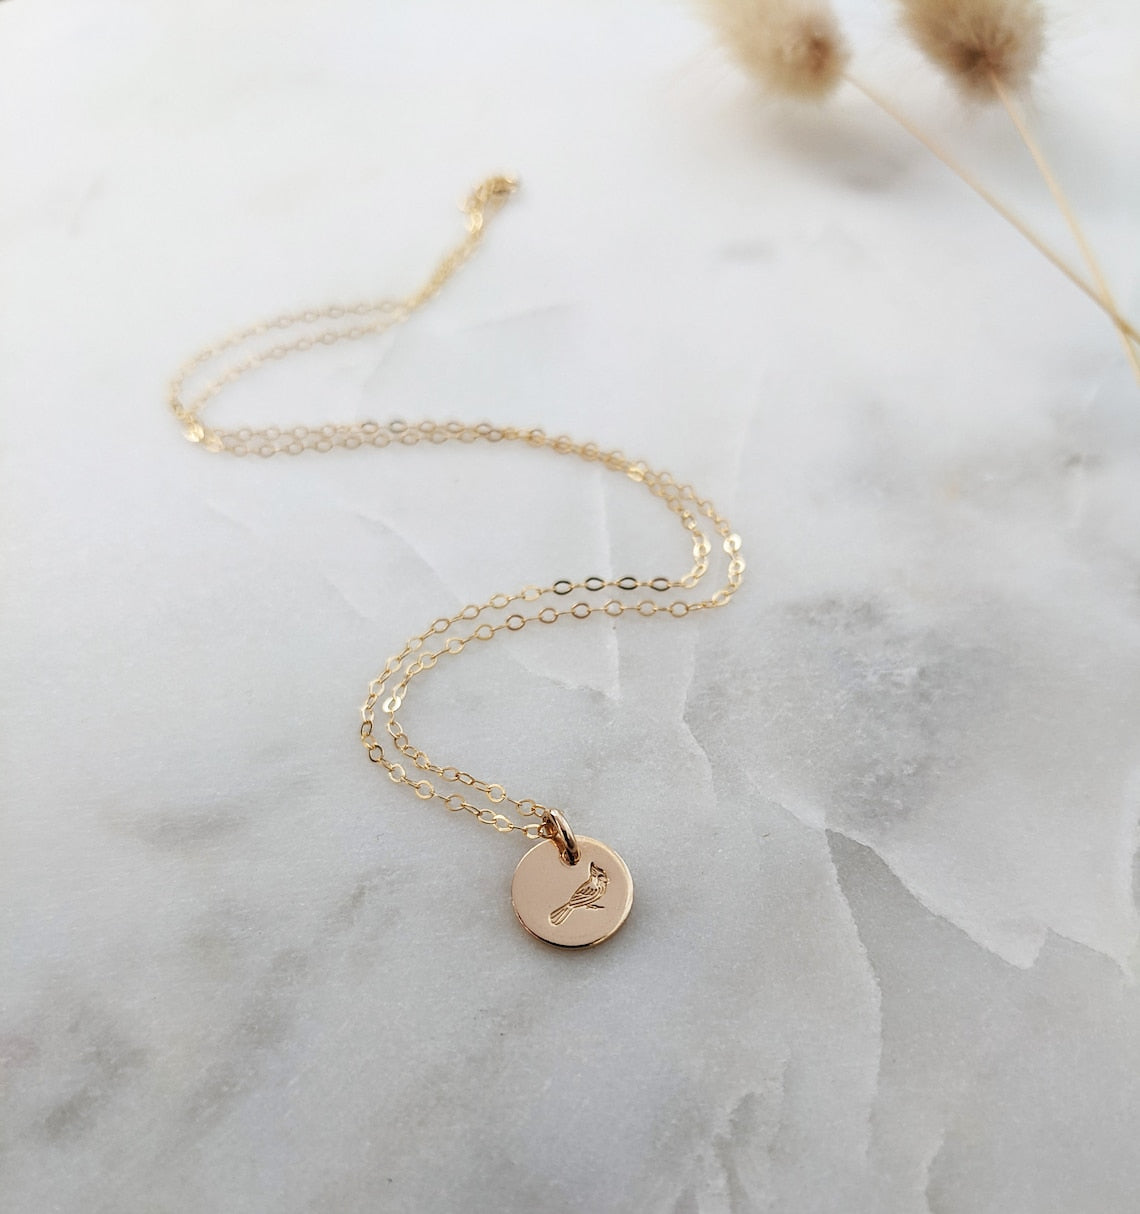 Cardinal Memorial Necklace | Sterling Silver or 14k Gold Fill